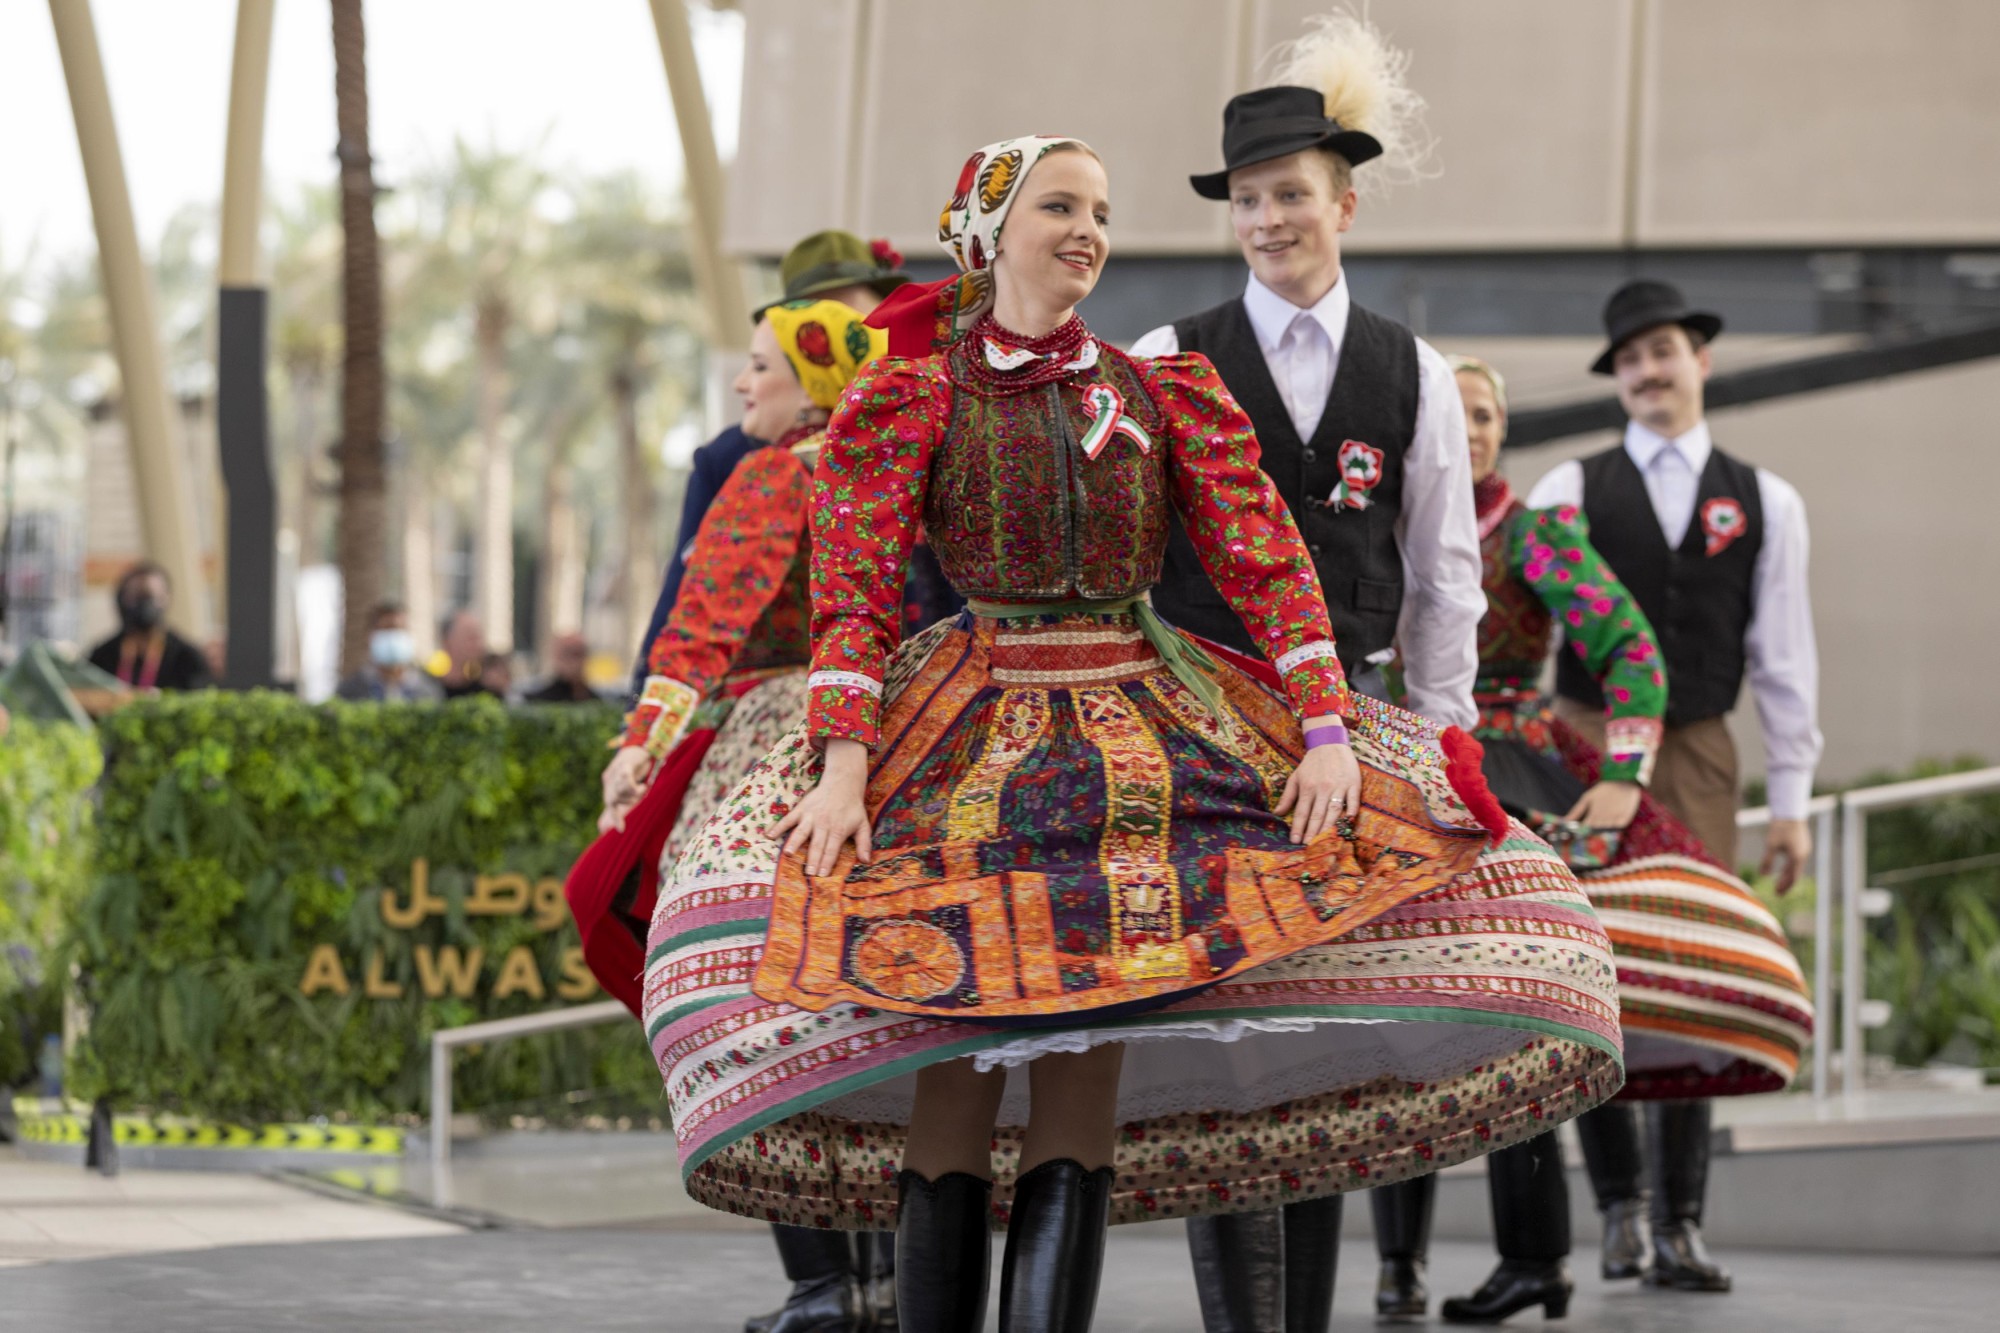 Cultural performance during the Hungary National Day Ceremony at Al Wasl m64905